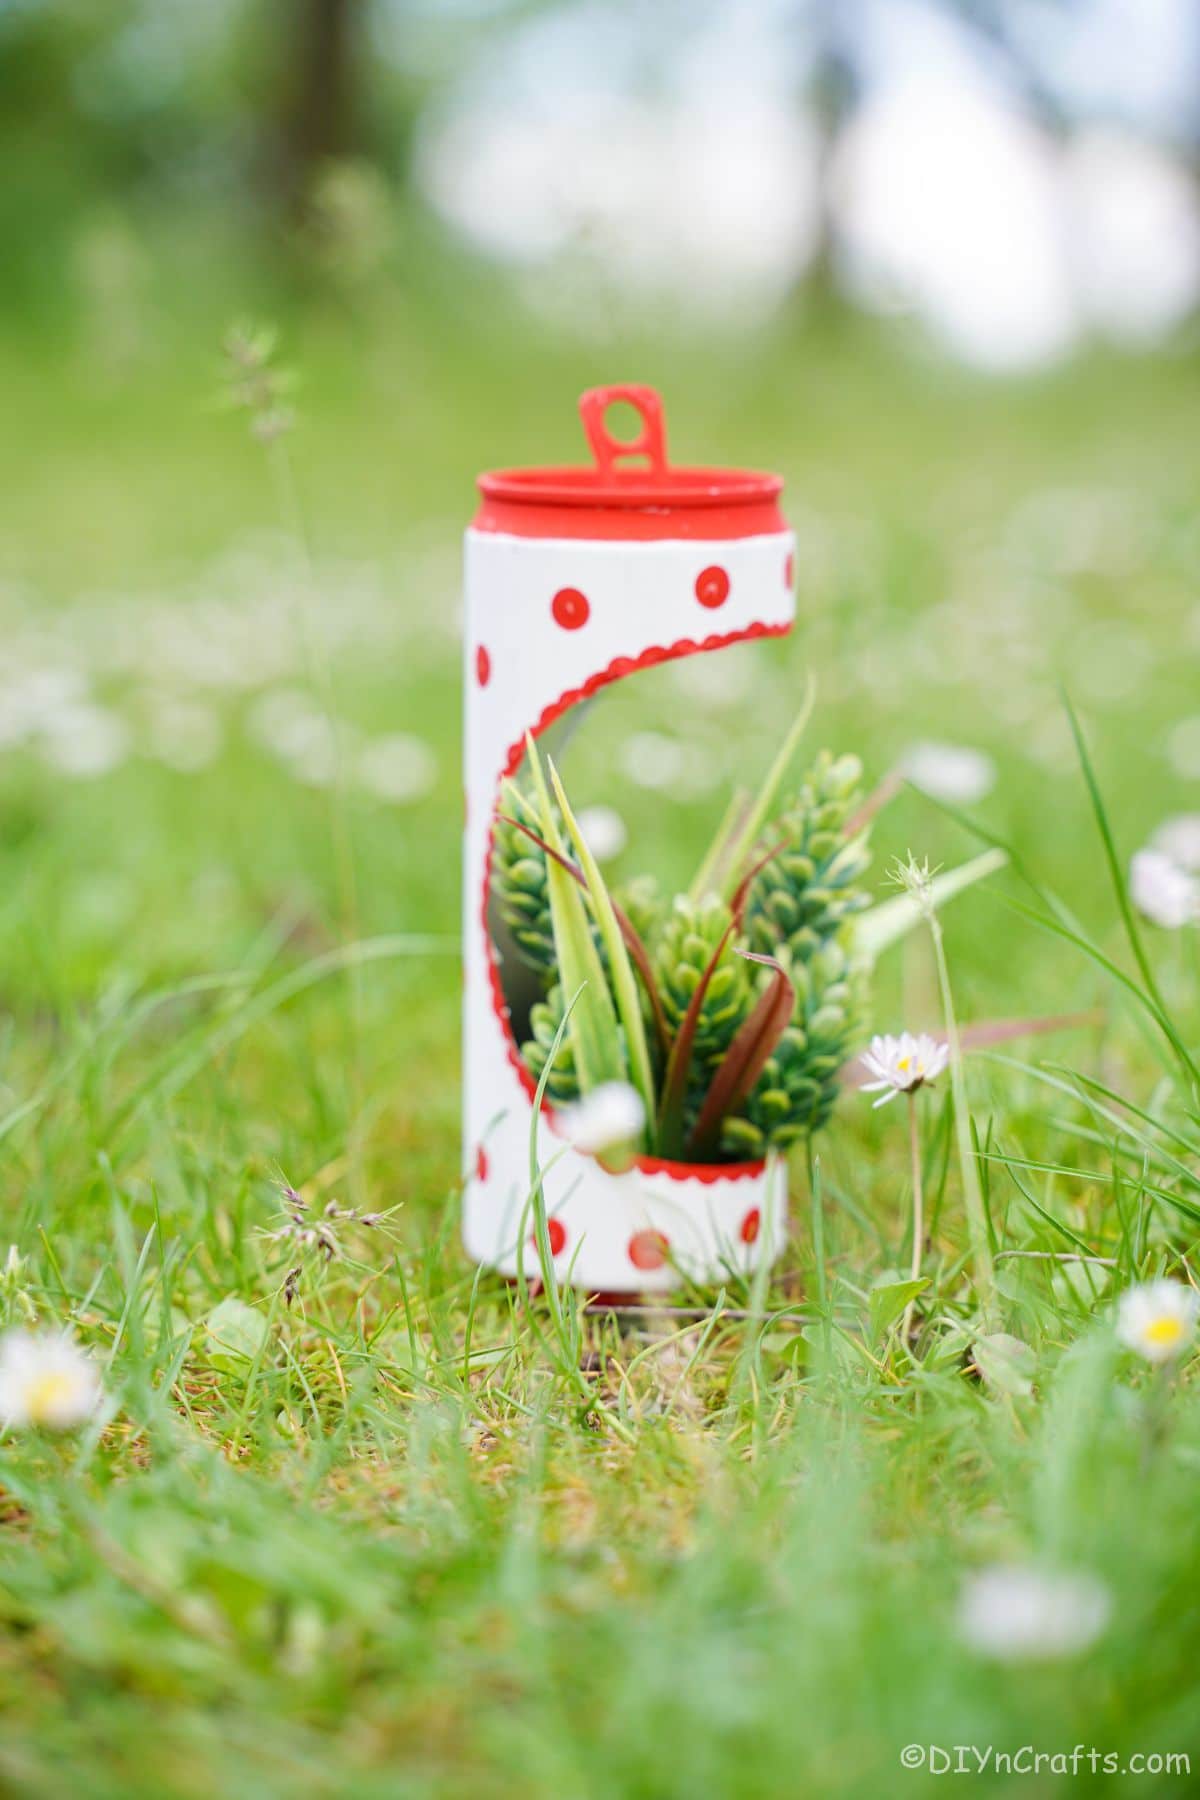 succulent planter made of soda can on grass